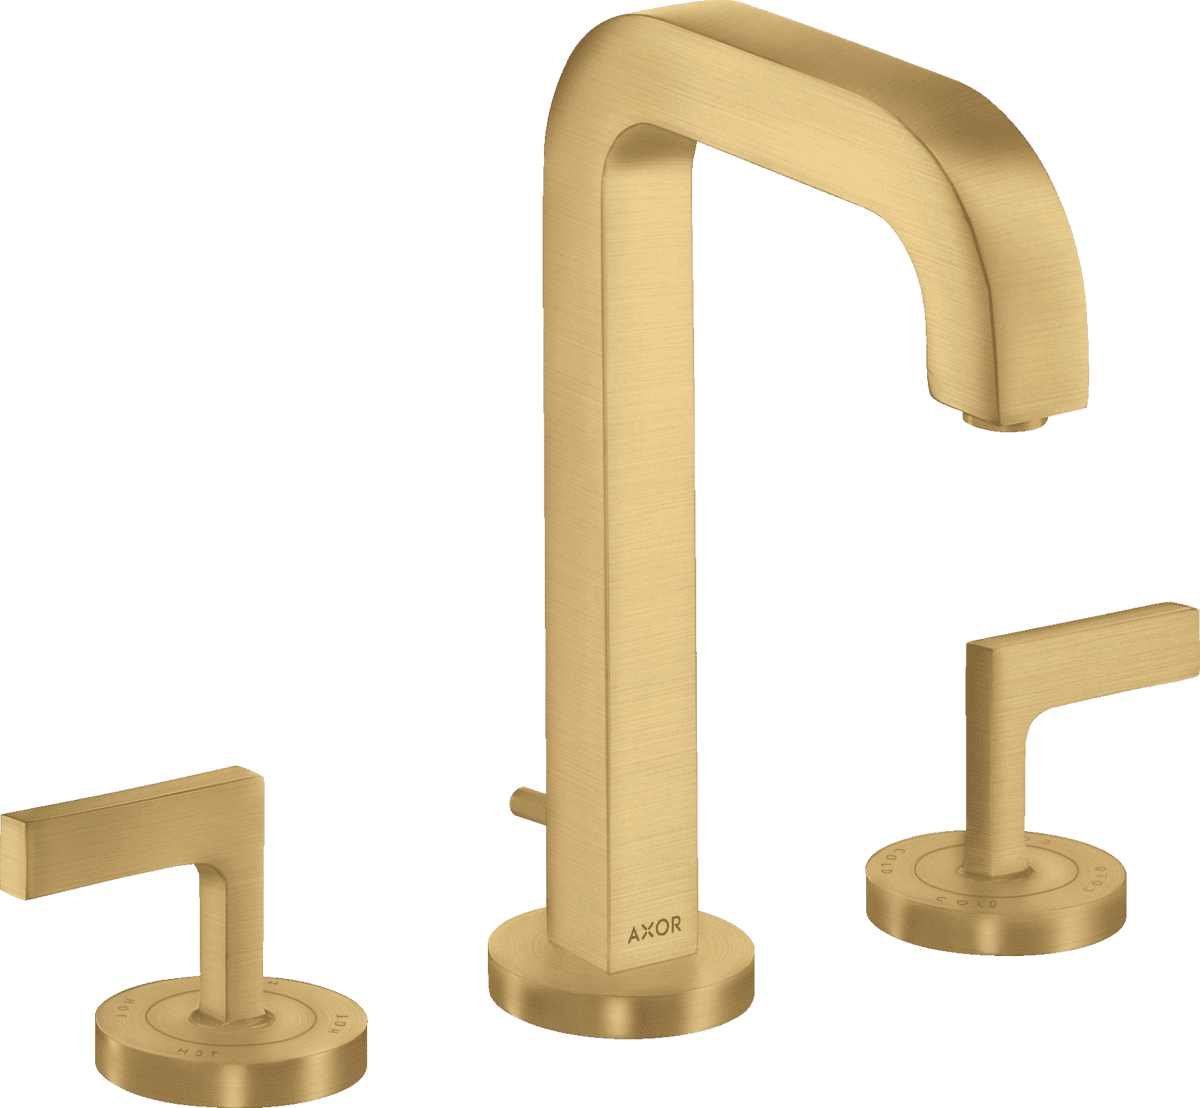 Picture of HANSGROHE AXOR Citterio 3-hole basin mixer 170 with spout 140 mm, lever handles, escutcheons and pop-up waste set #39135250 - Brushed Gold Optic